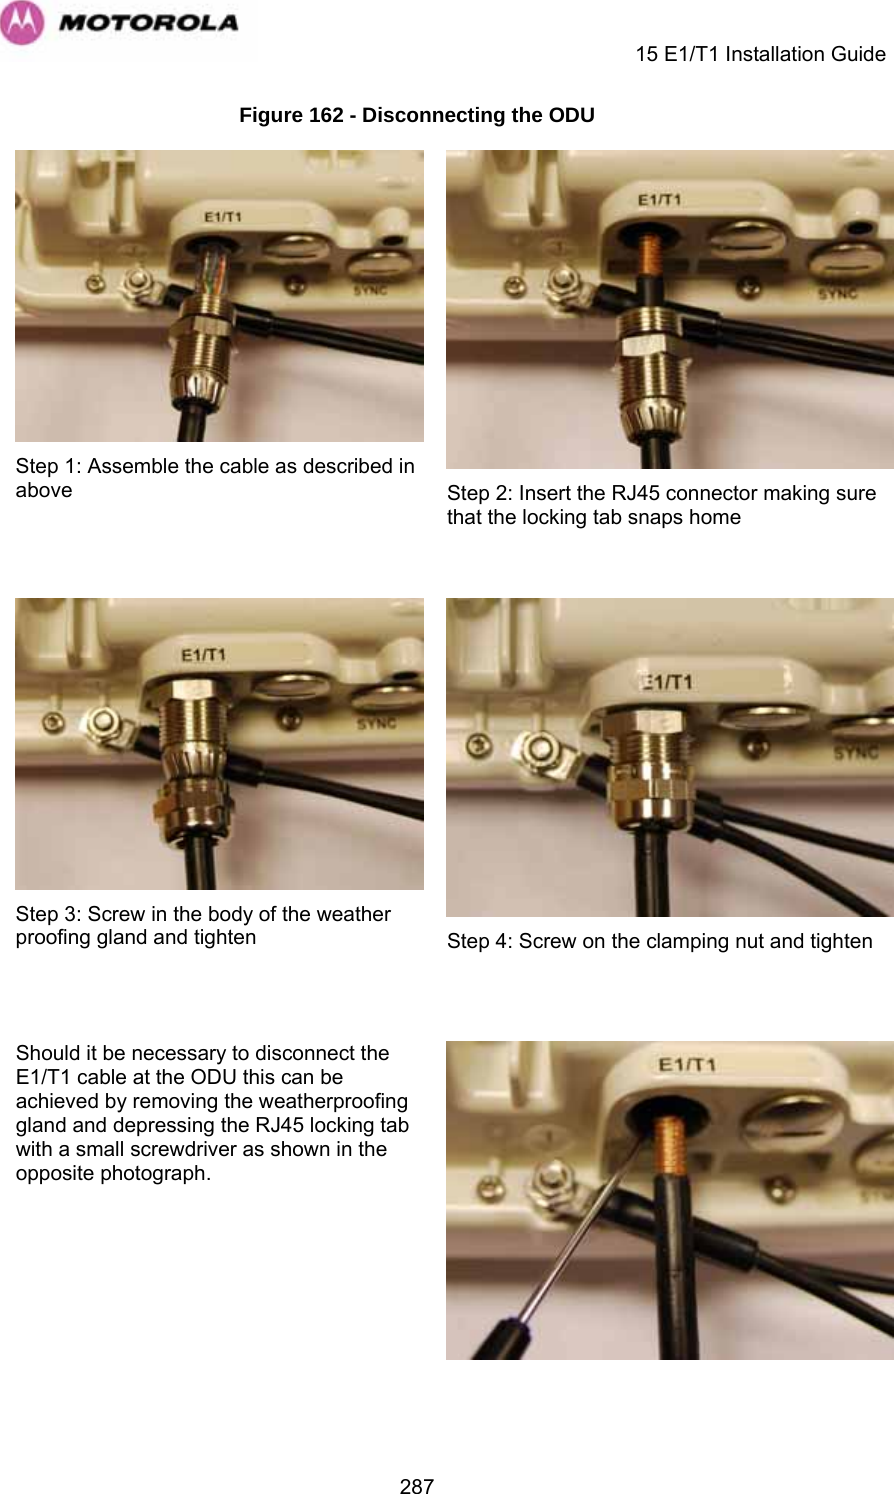     15 E1/T1 Installation Guide  287Figure 162 - Disconnecting the ODU  Step 1: Assemble the cable as described in above  Step 2: Insert the RJ45 connector making sure that the locking tab snaps home  Step 3: Screw in the body of the weather proofing gland and tighten  Step 4: Screw on the clamping nut and tighten Should it be necessary to disconnect the E1/T1 cable at the ODU this can be achieved by removing the weatherproofing gland and depressing the RJ45 locking tab with a small screwdriver as shown in the opposite photograph.    